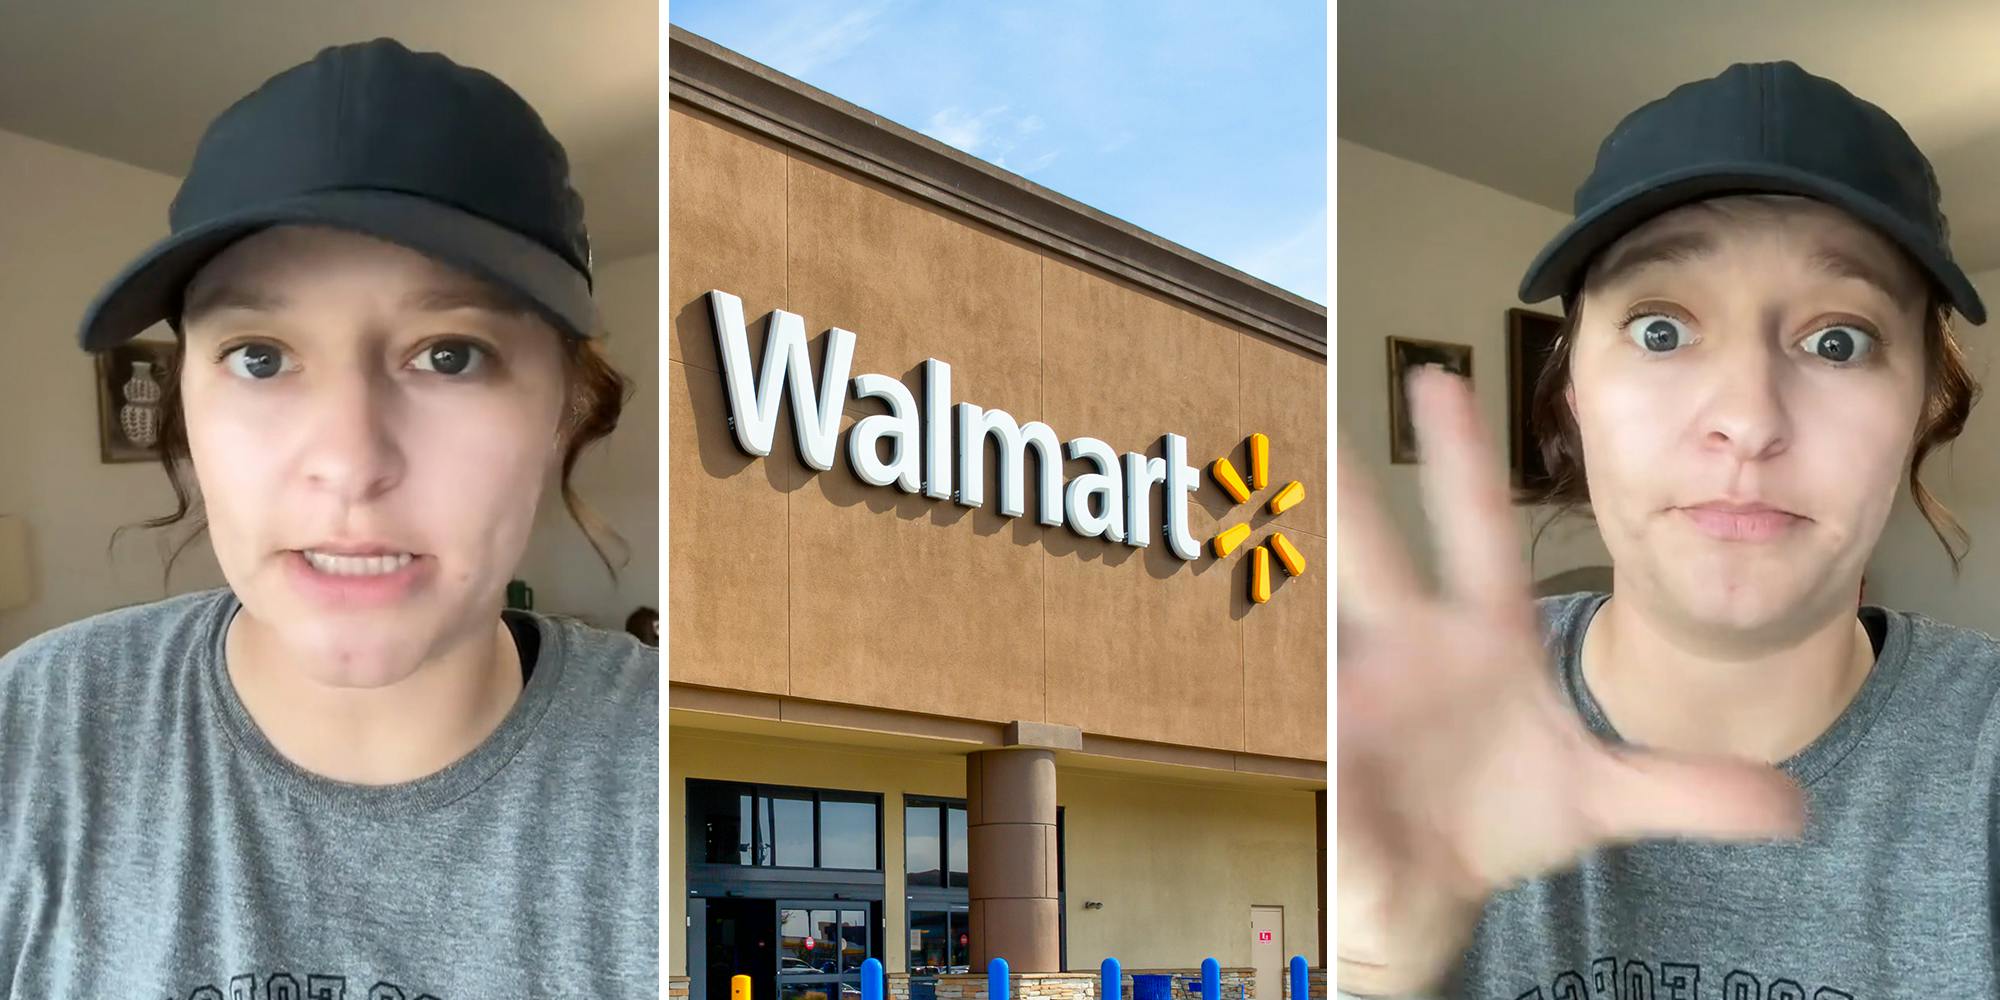 ‘Walmart is trying to steal from us’: Shopper slams Walmart after discovering $46 charge for ‘nothing’ on receipt